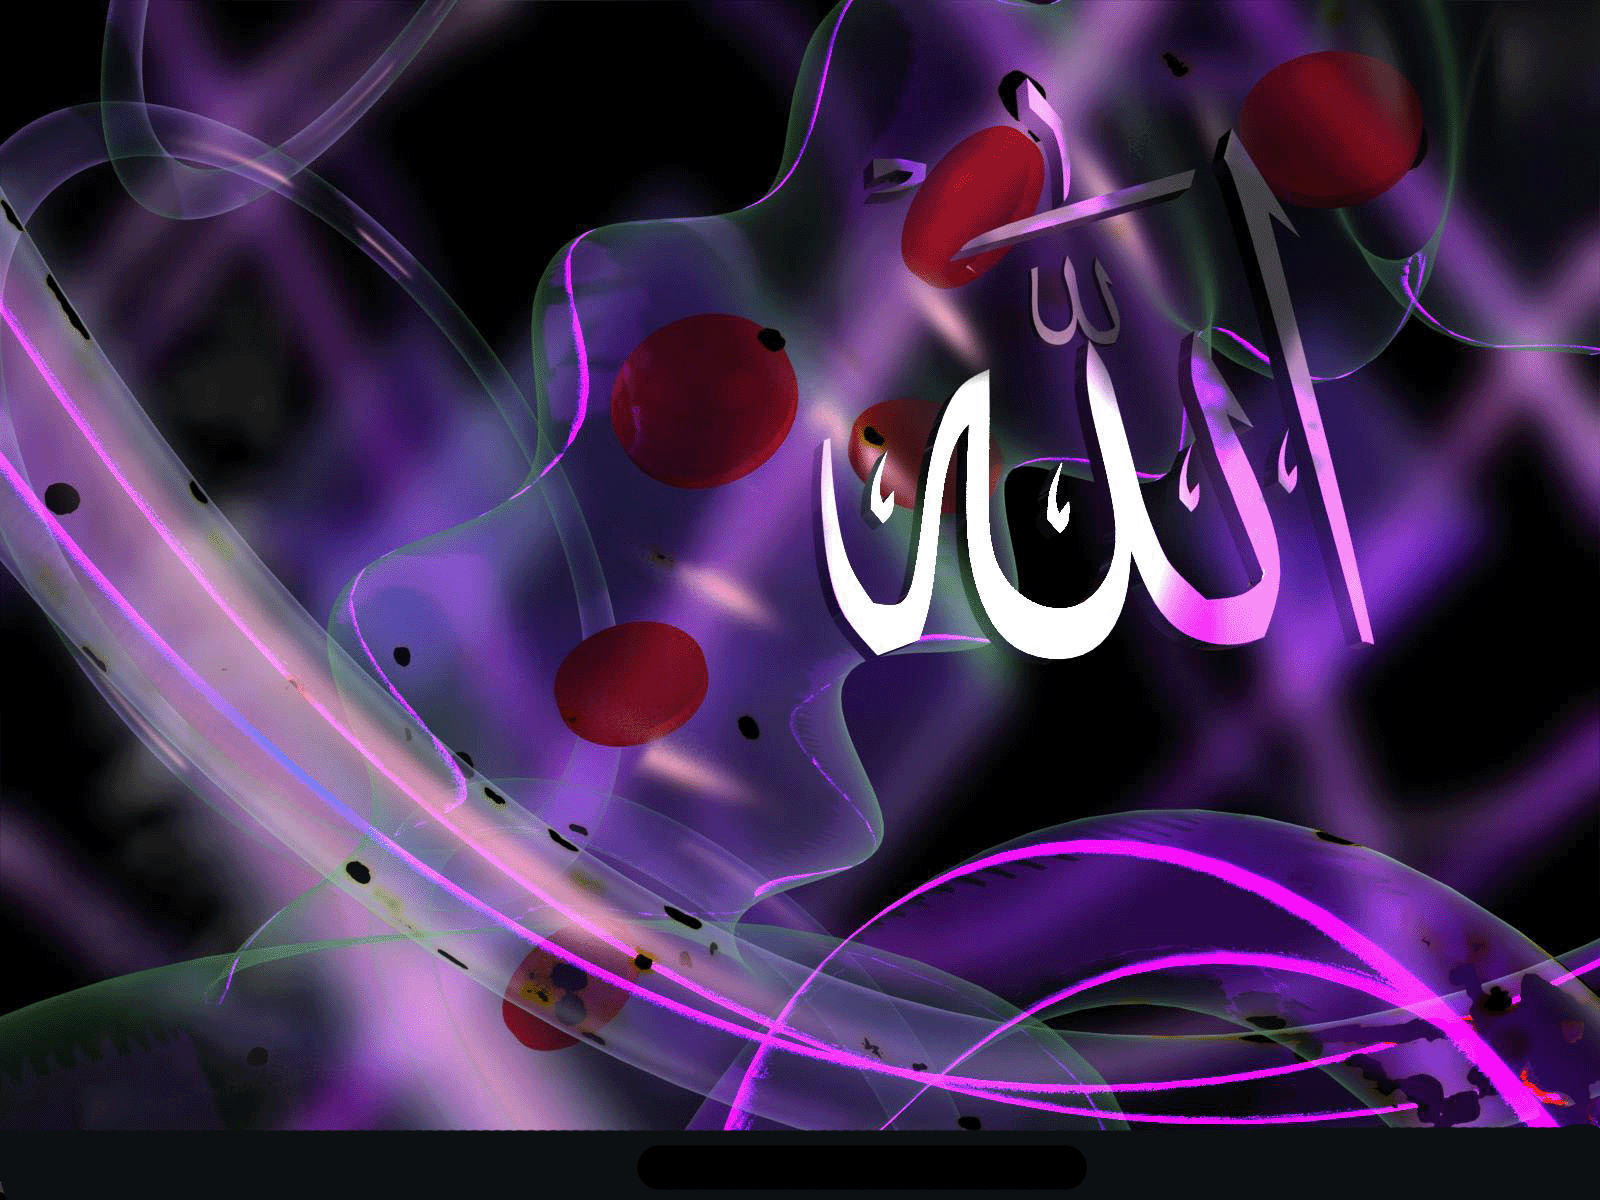 Free download allah images download hd 2015 posted on 03 28 2015 by